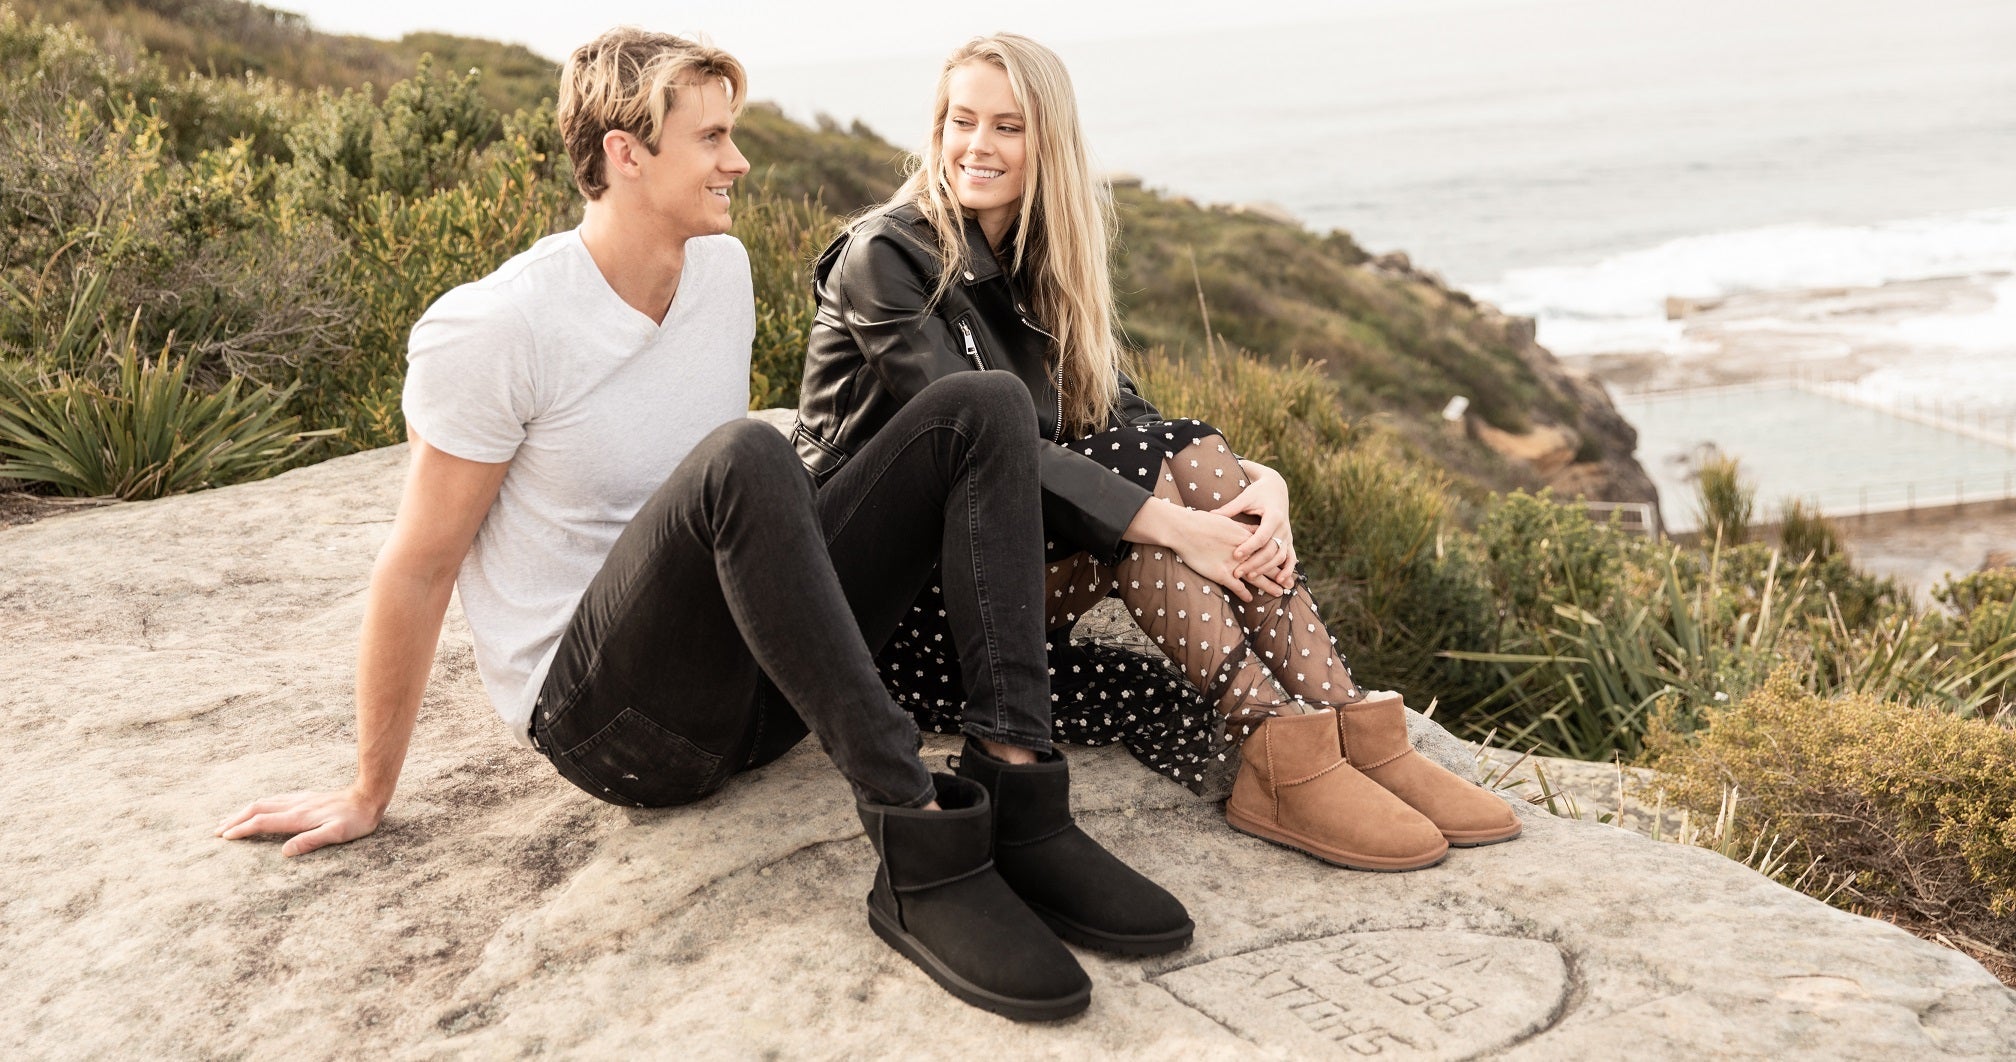 Women's UGG Boots For Your Winter Wardrobe